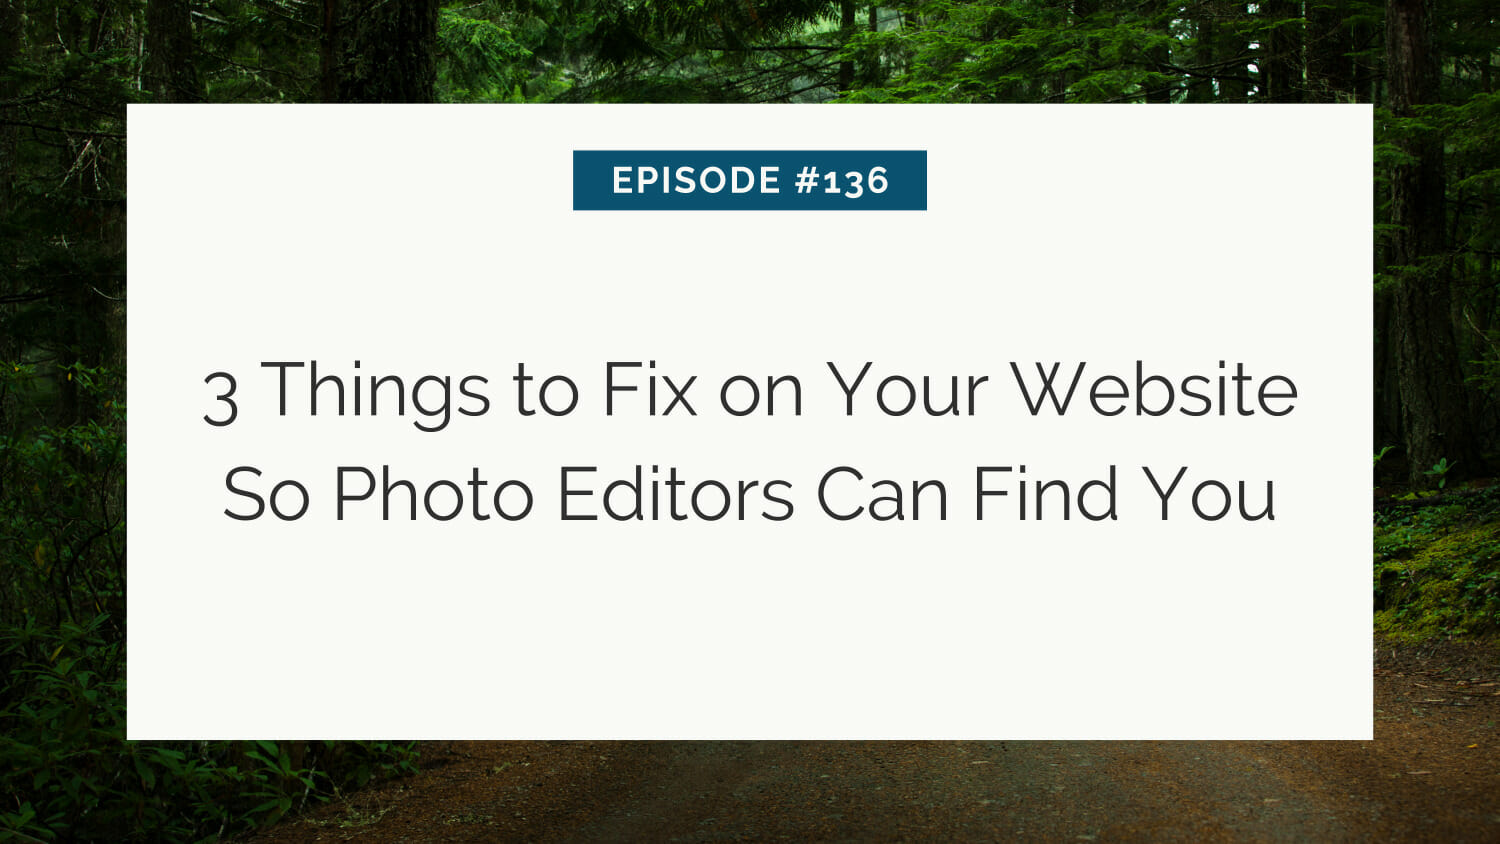 A presentation slide titled "episode #136: 3 things to fix on your website so photo editors can find you" set against a forest background.